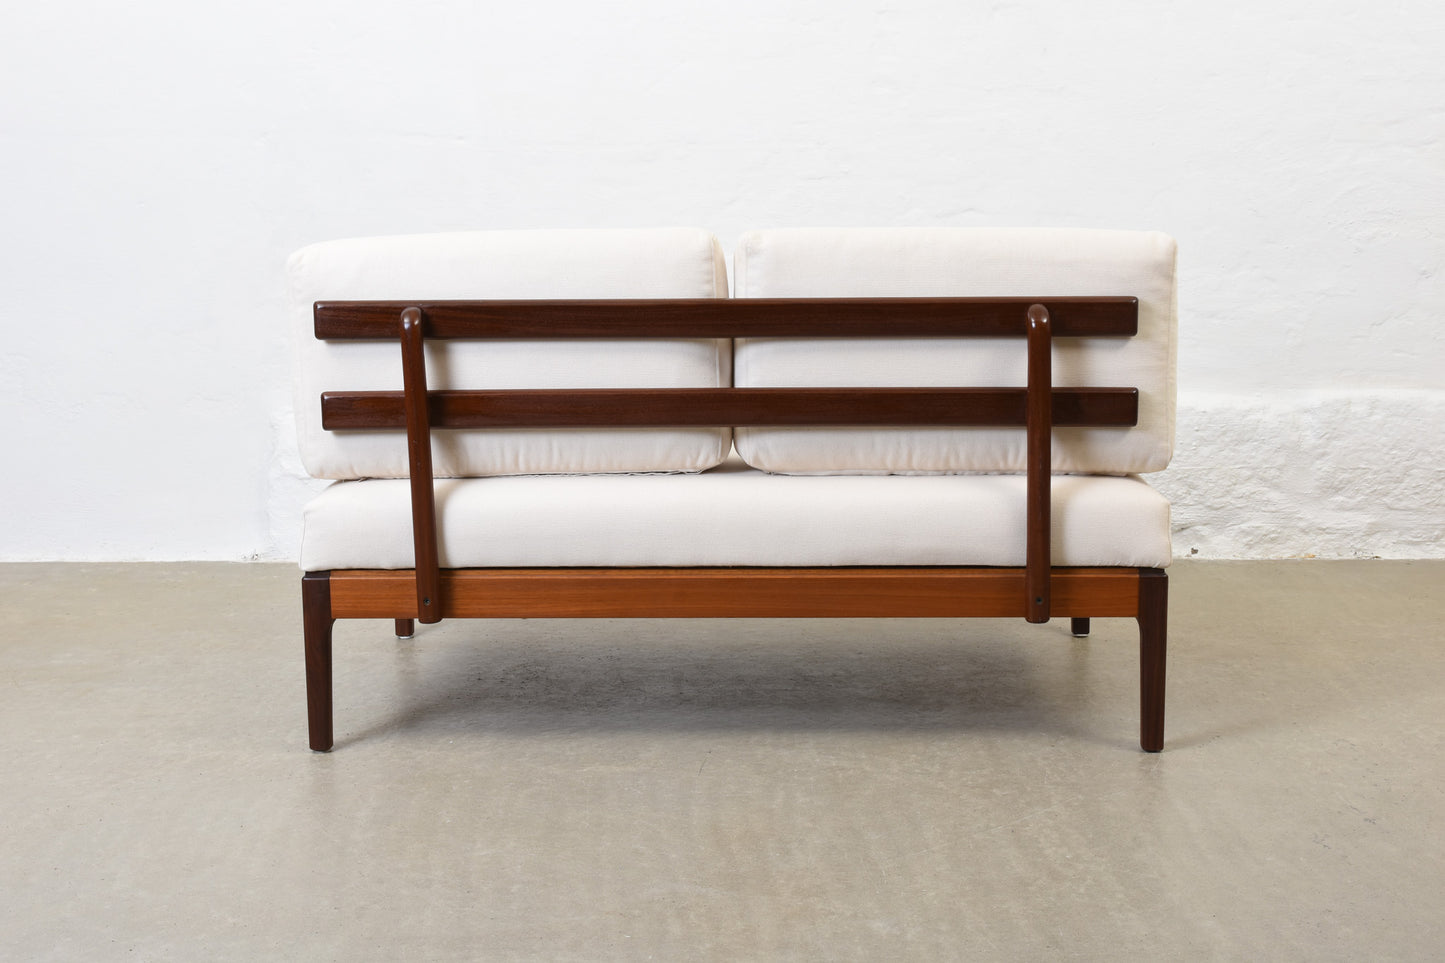 Newly reupholstered: 1960s Norwegian day bed in teak